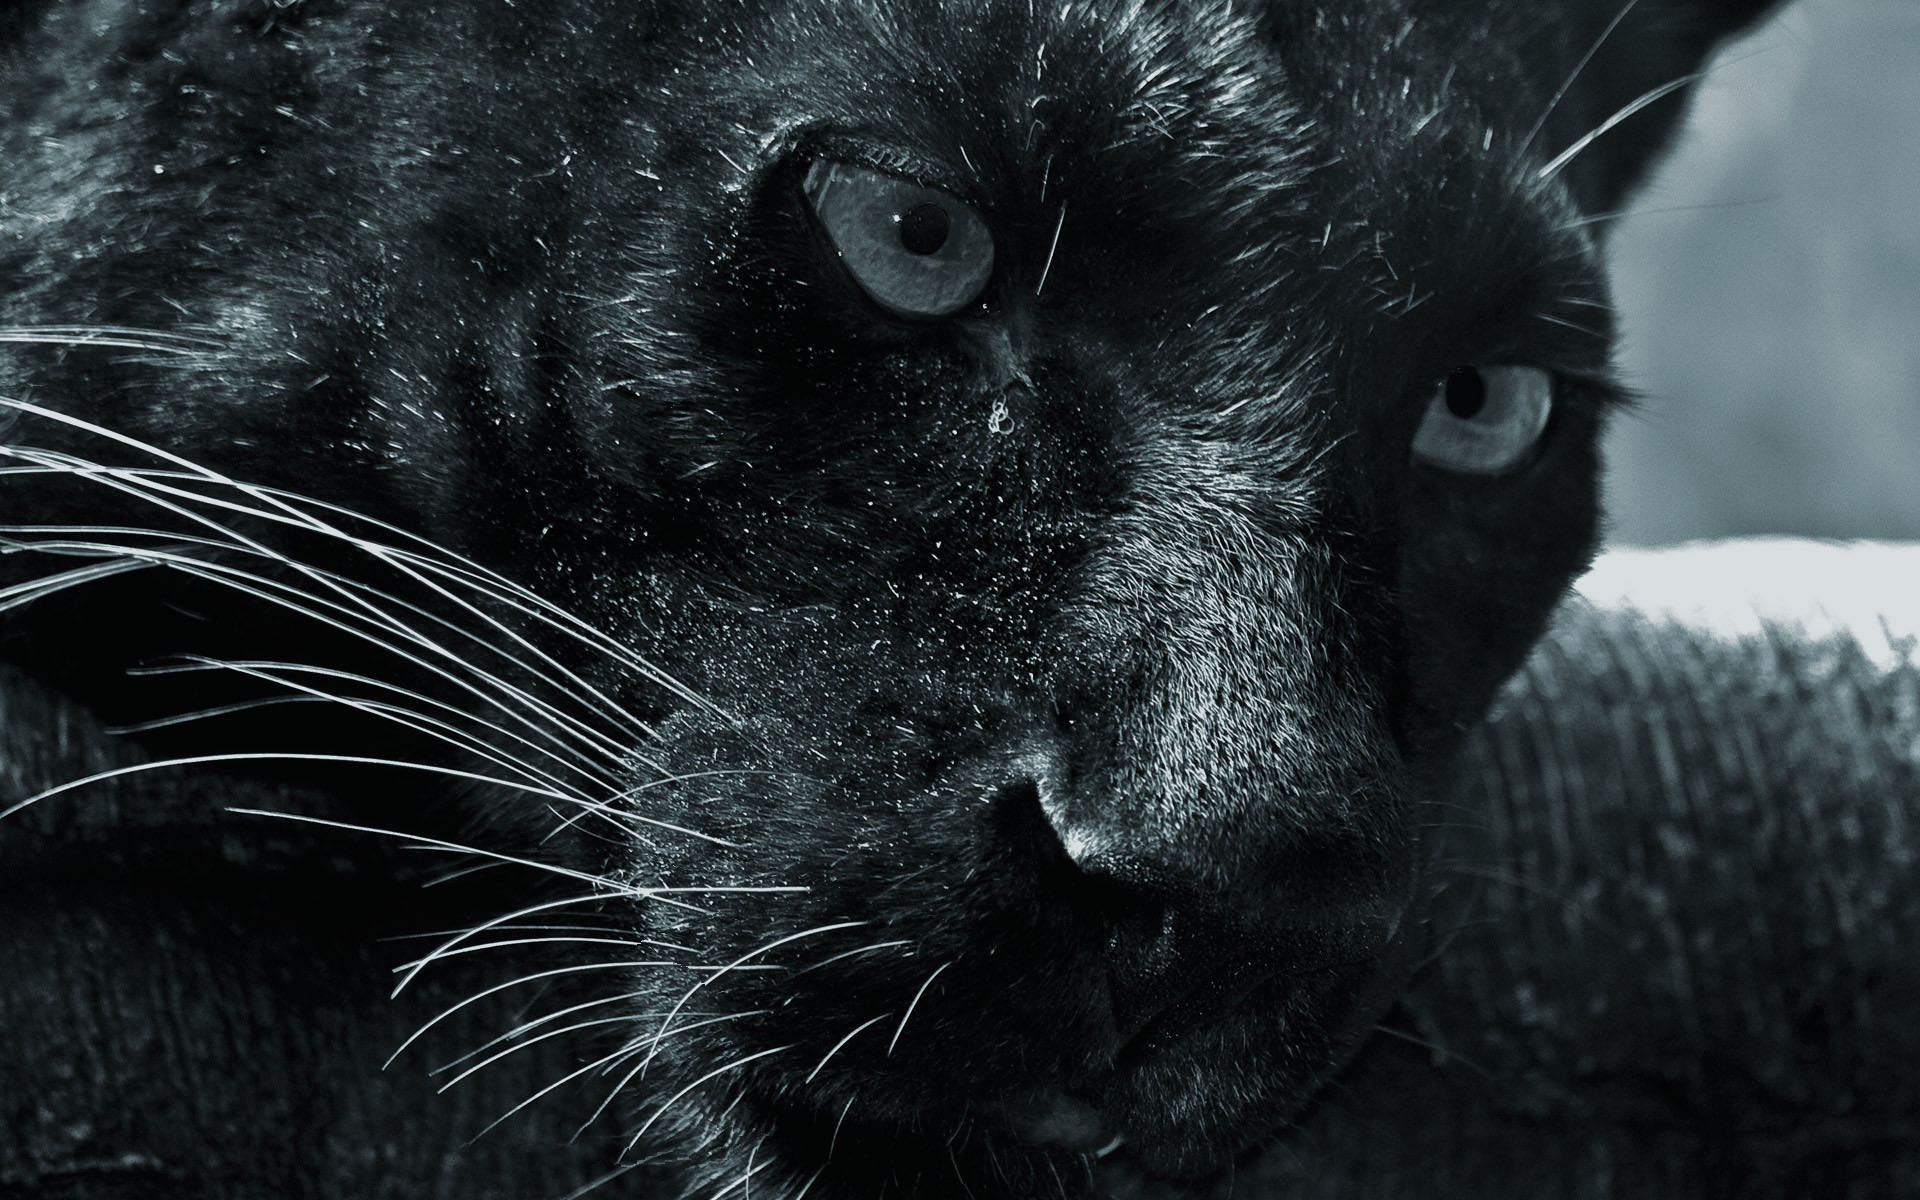 Panther wallpapers and images - wallpapers, pictures, photos